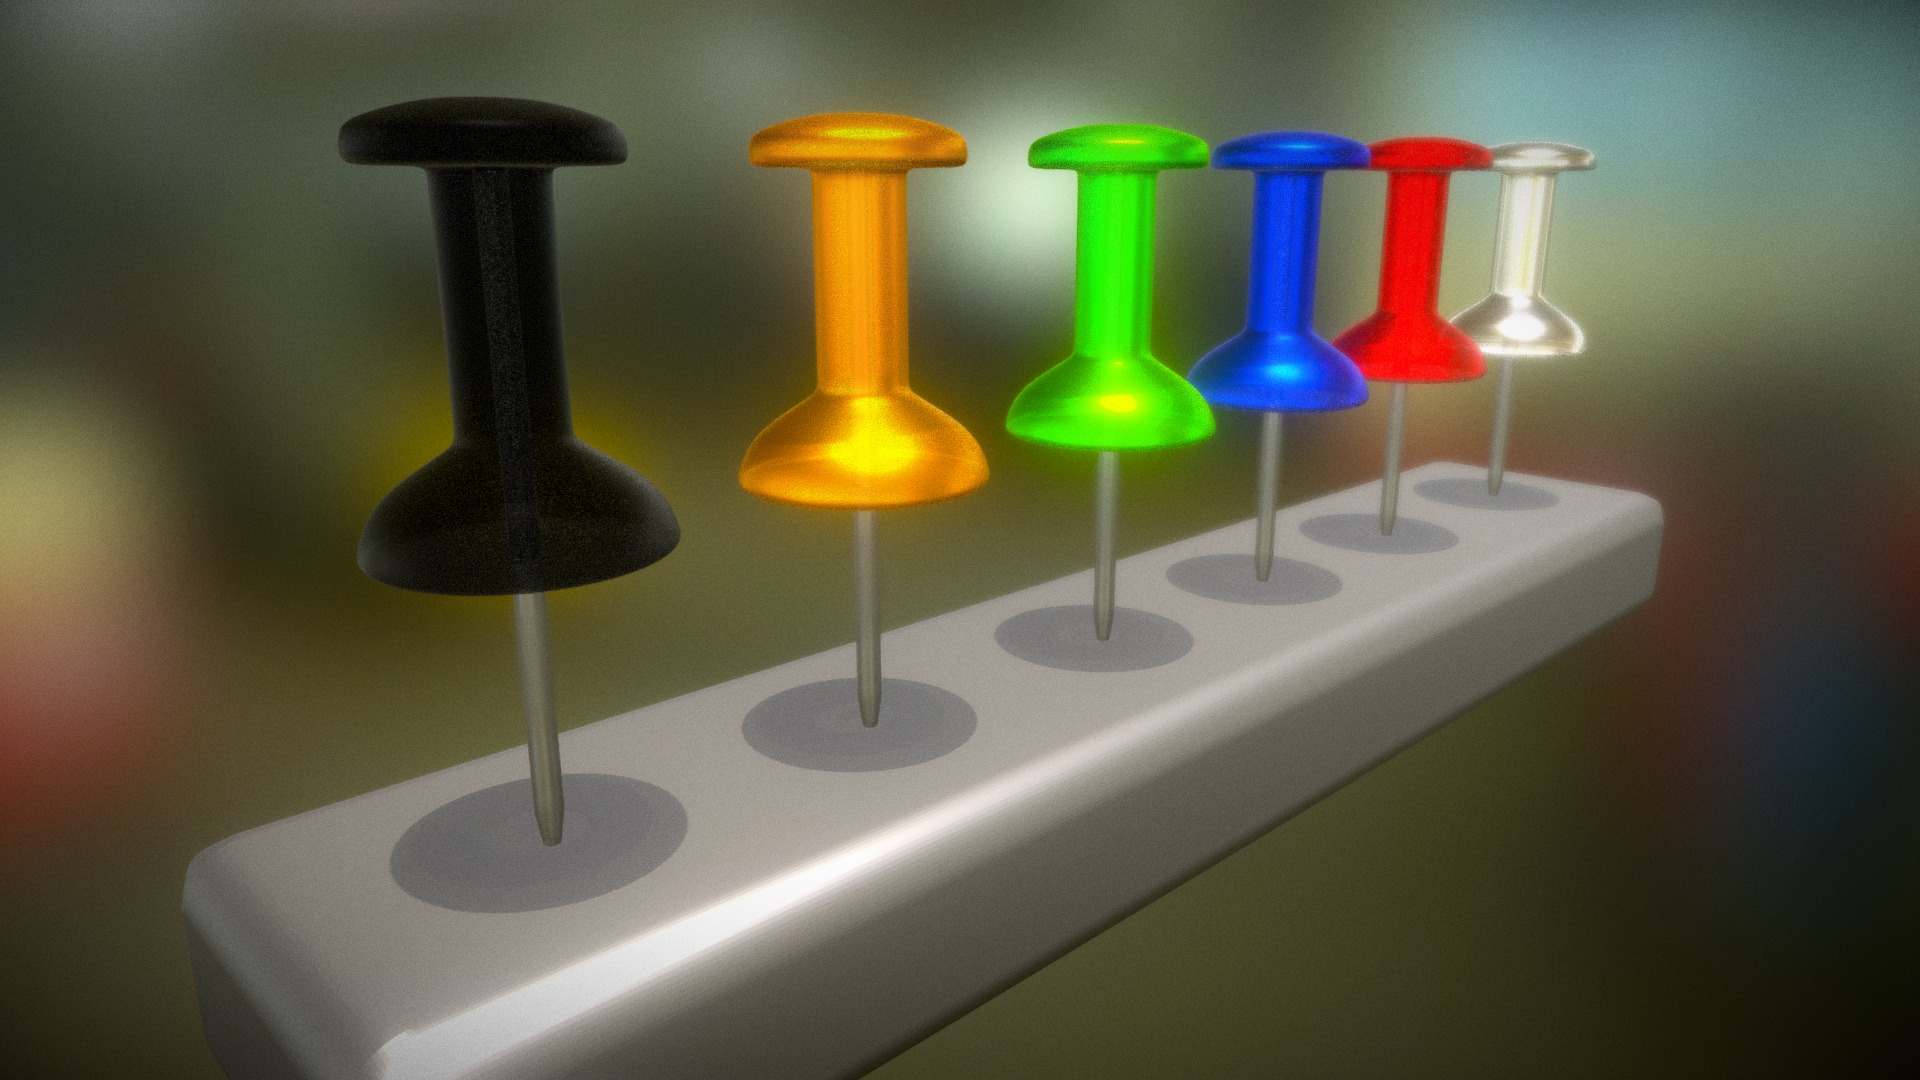 3D model Pins - This is a 3D model of the Pins. The 3D model is about a group of colorful stools.